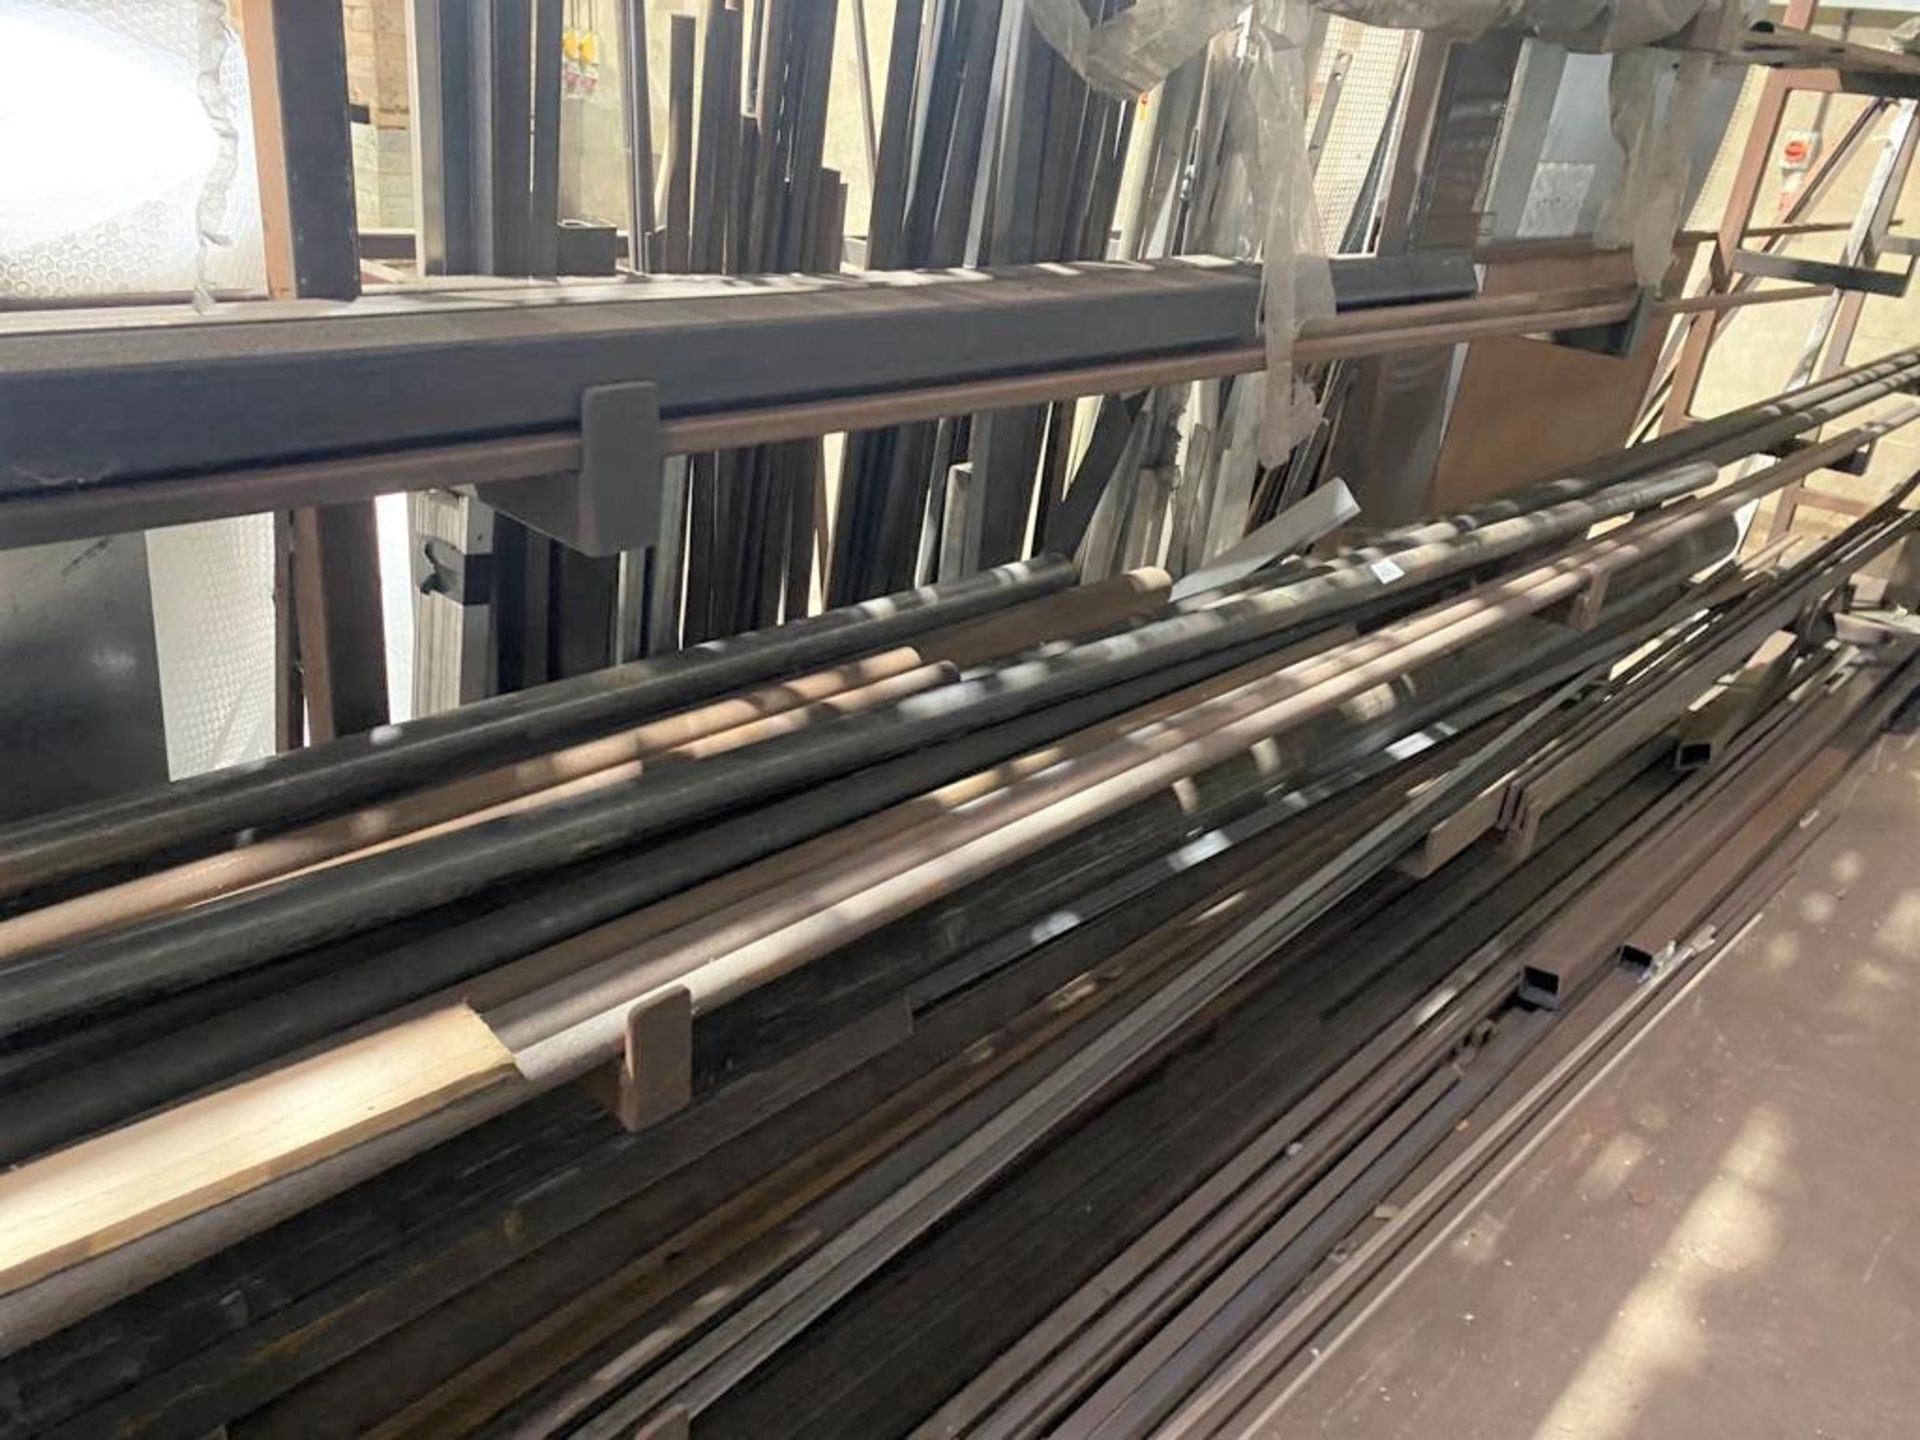 1 x Assorted Lot of Mild Steel Tubing, Strips and Box Sections - Various Lengths Upto 6 Meters in - Image 2 of 7